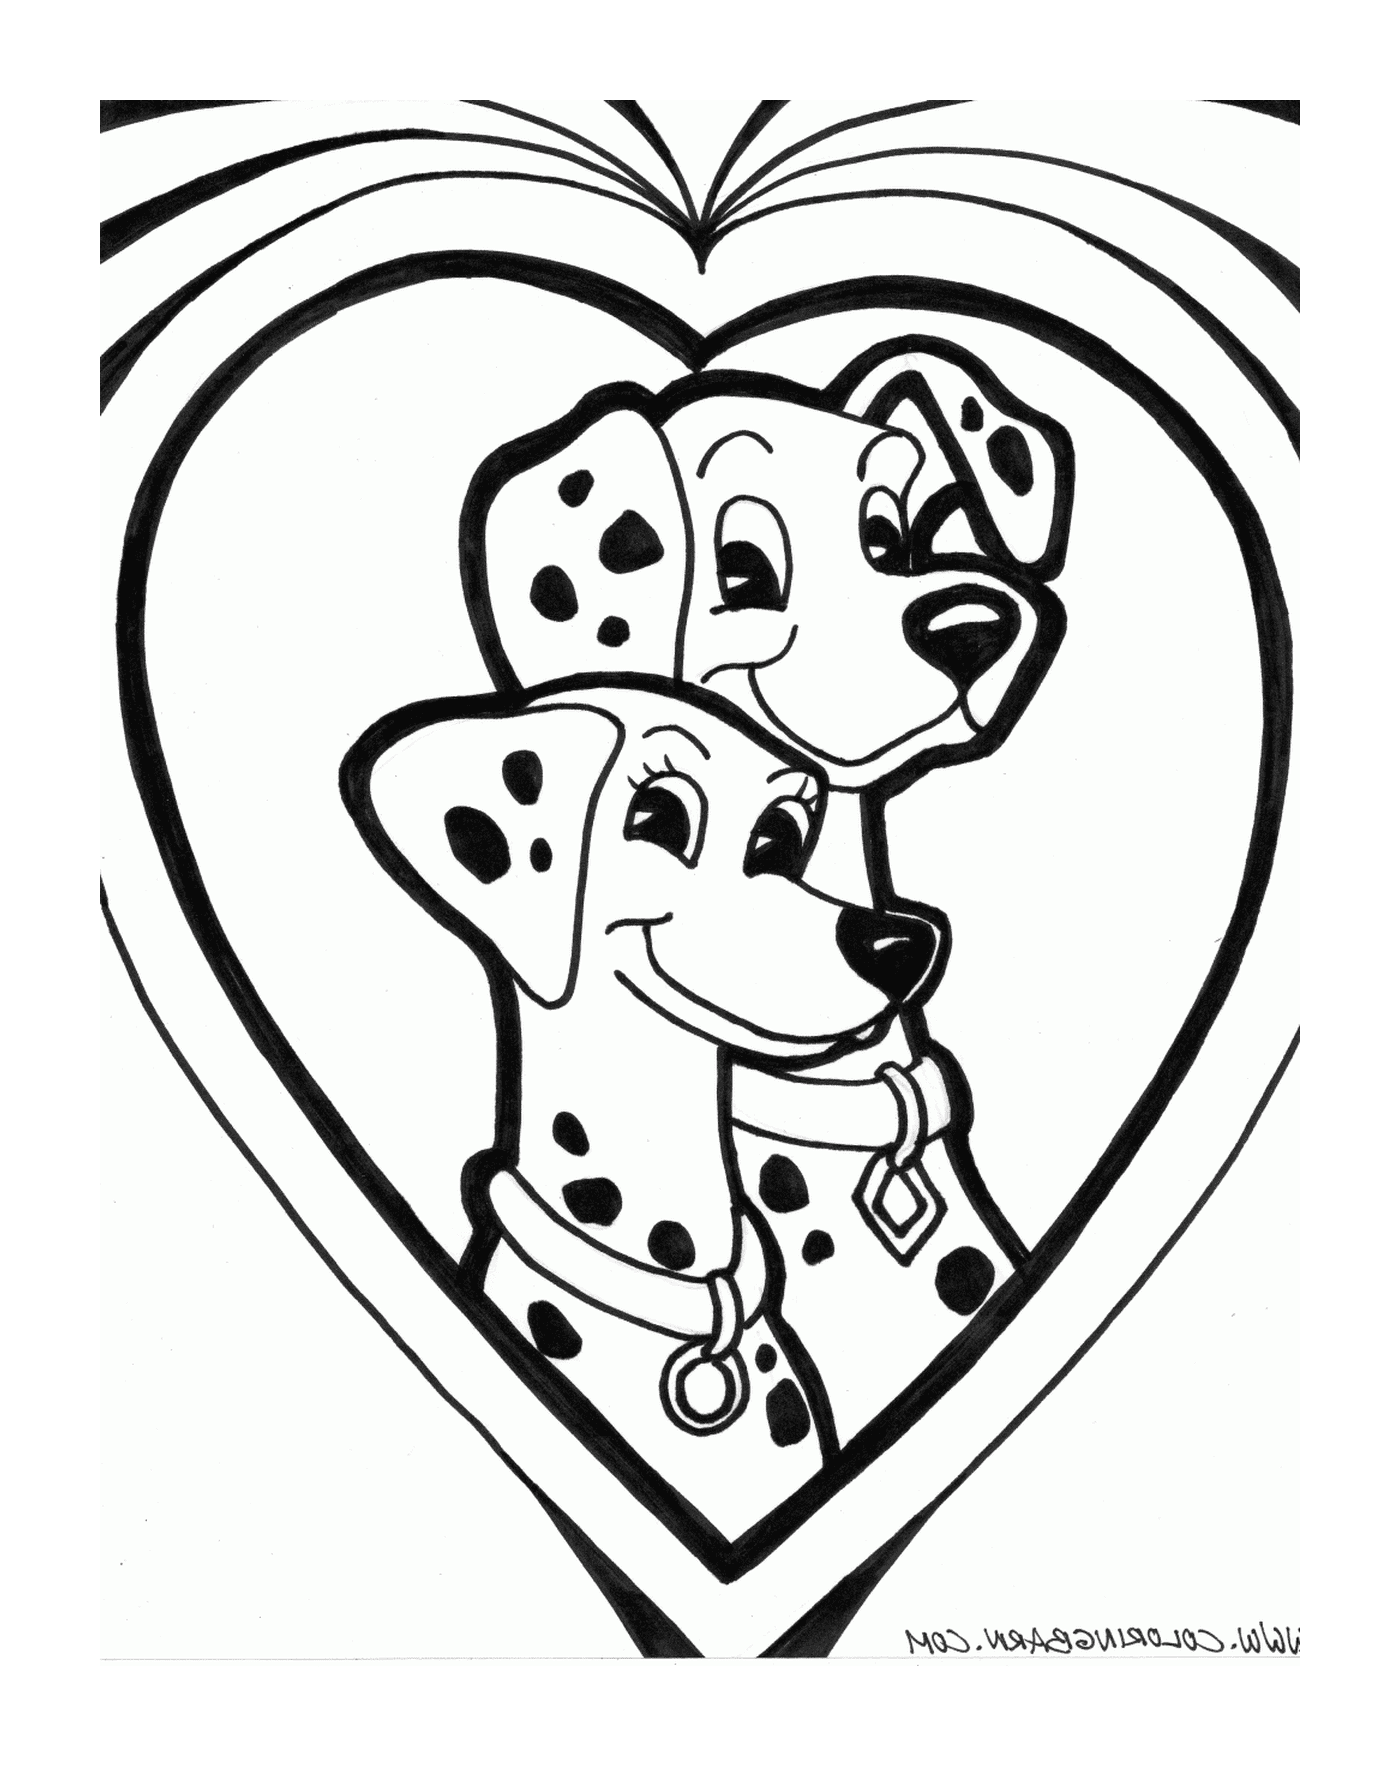  Two Dalmatians sitting in front of a heart 